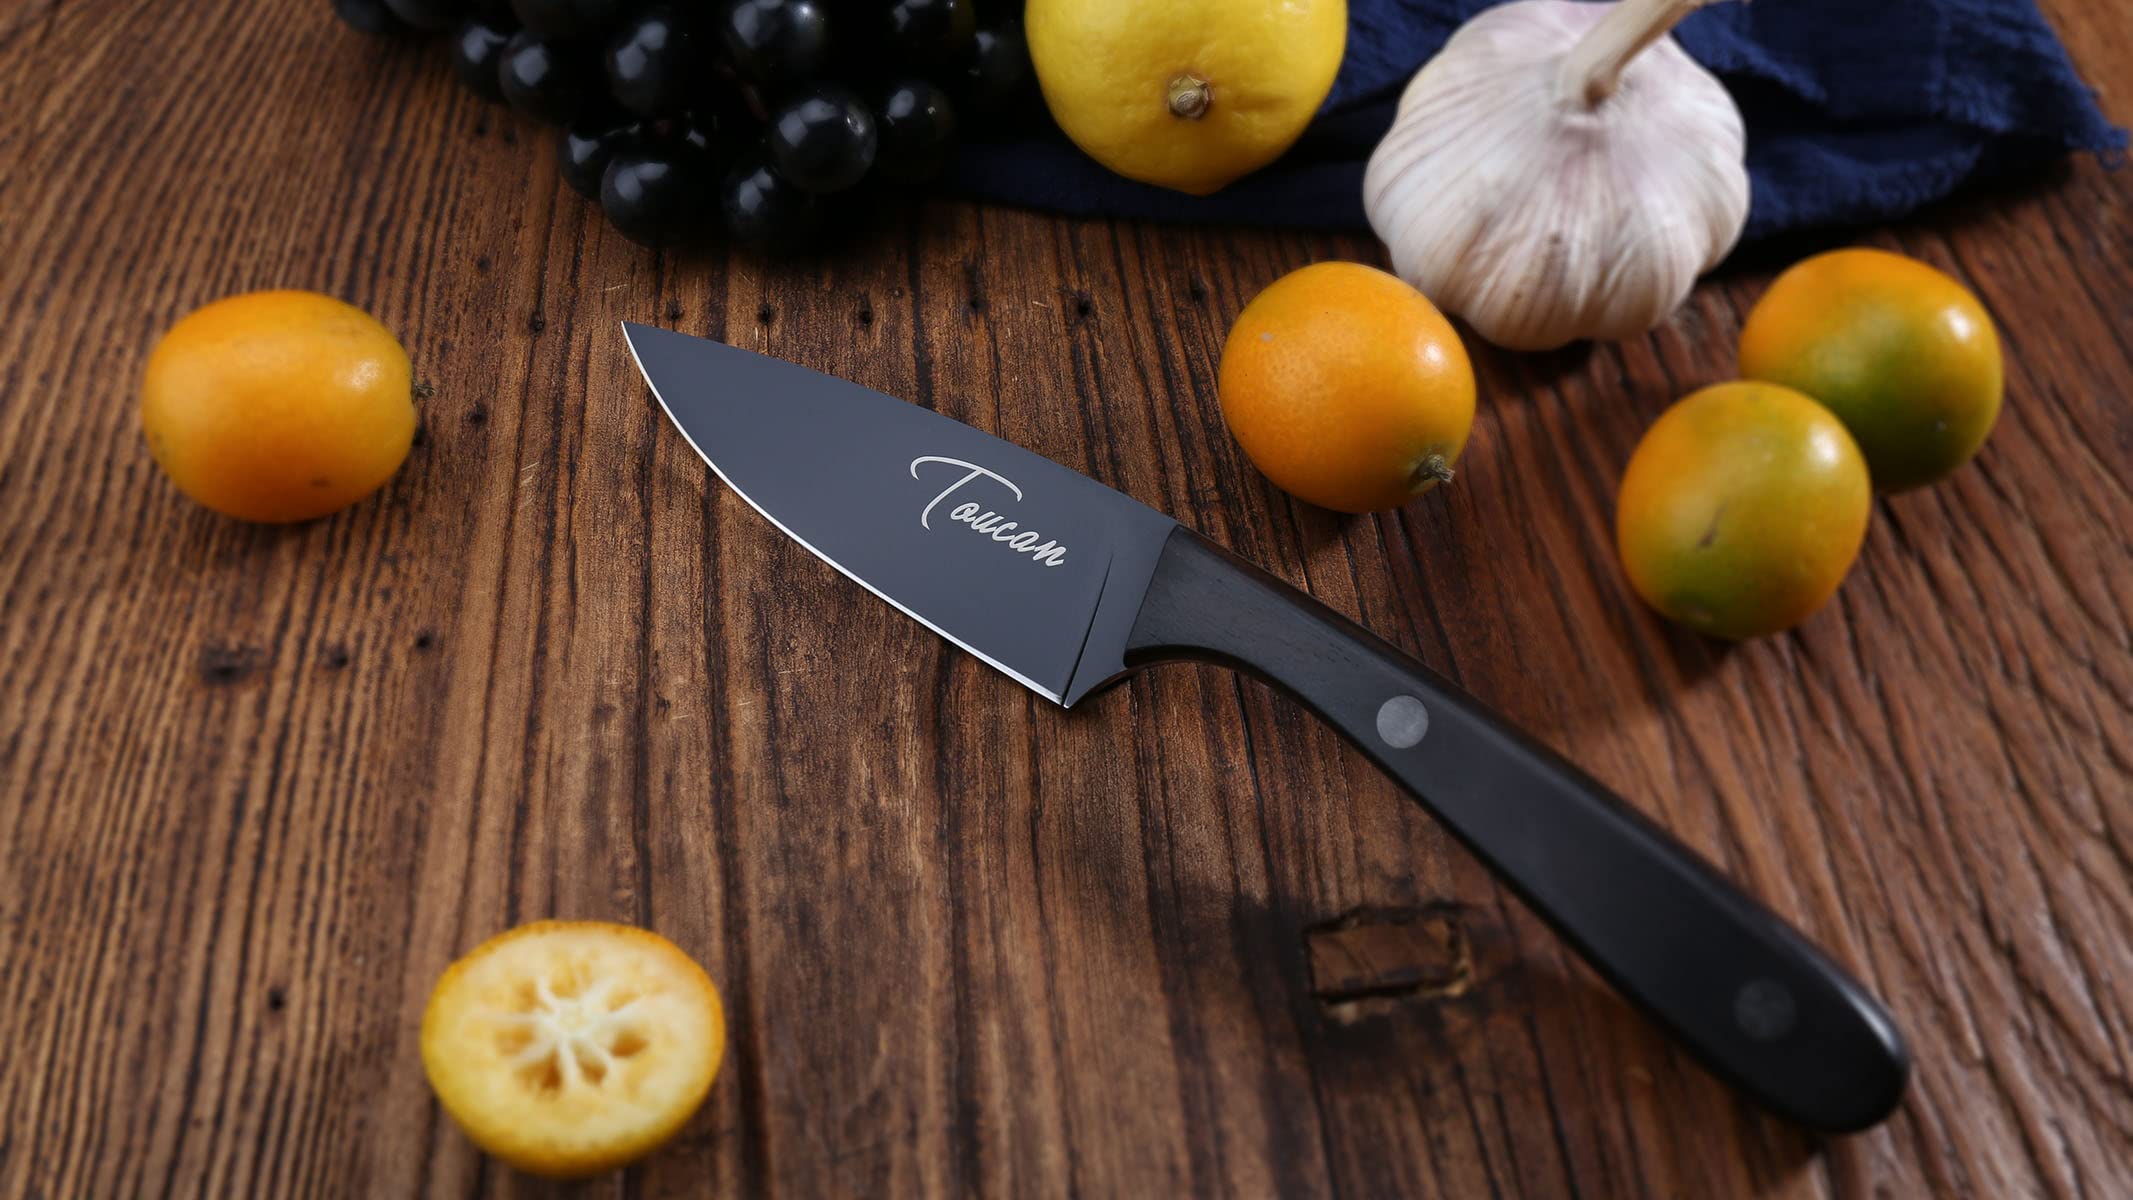 TOUCAN Black Paring Knife – Professional Kitchen Knife for Fruits and Vegetables – Premium Stainless Steel with Ergonomic Handle – 4-inch Blade for Chopping, Cutting, Peeling